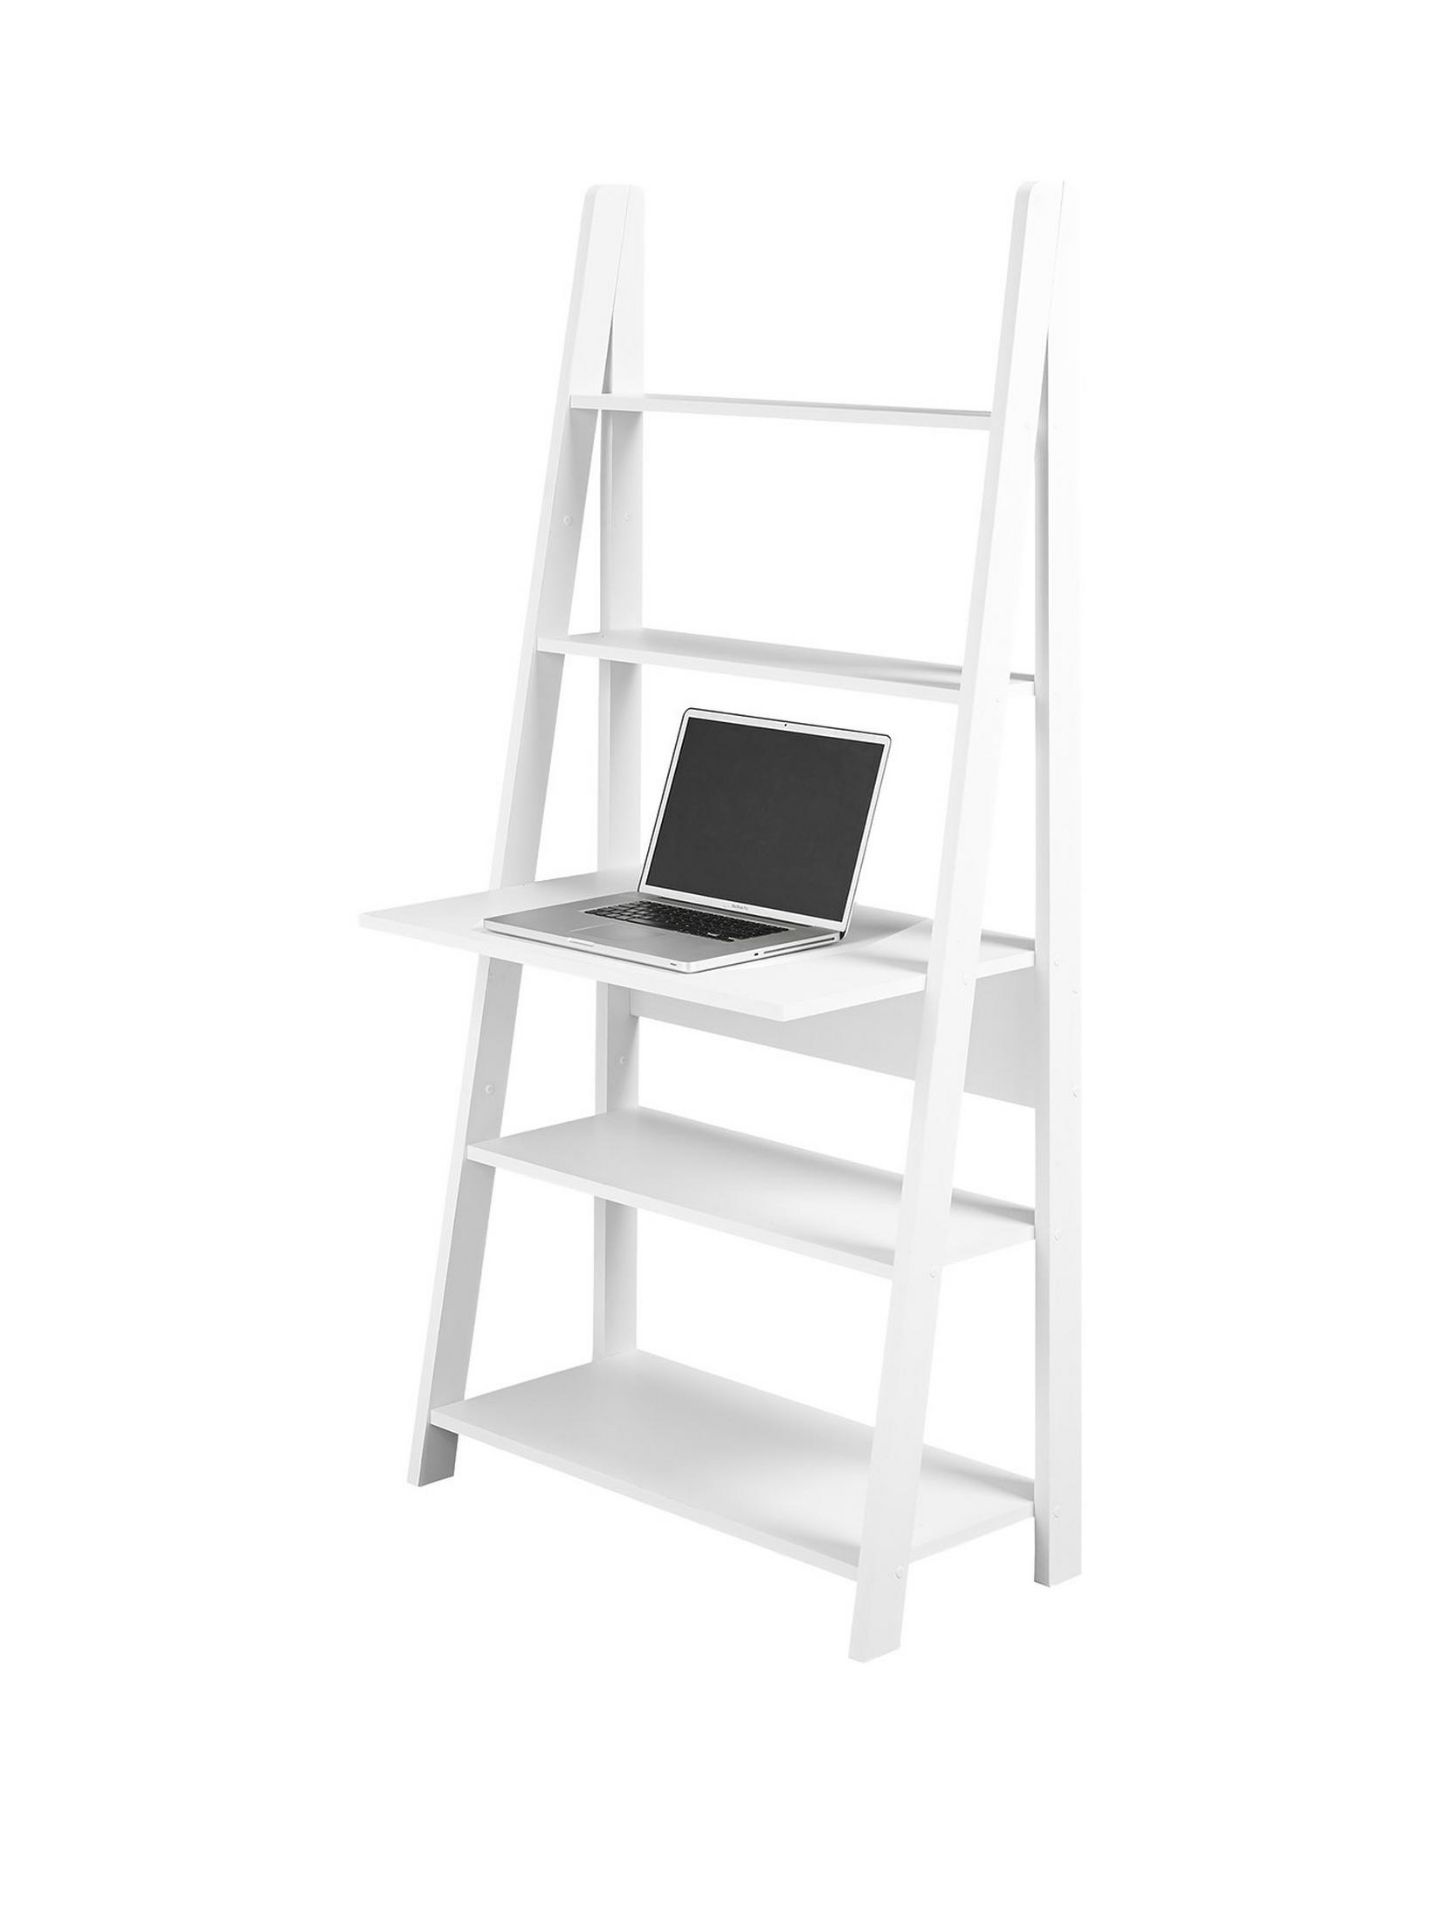 TIVA SHELVING UNIT WITH DESK IN WHITE - RRP £159